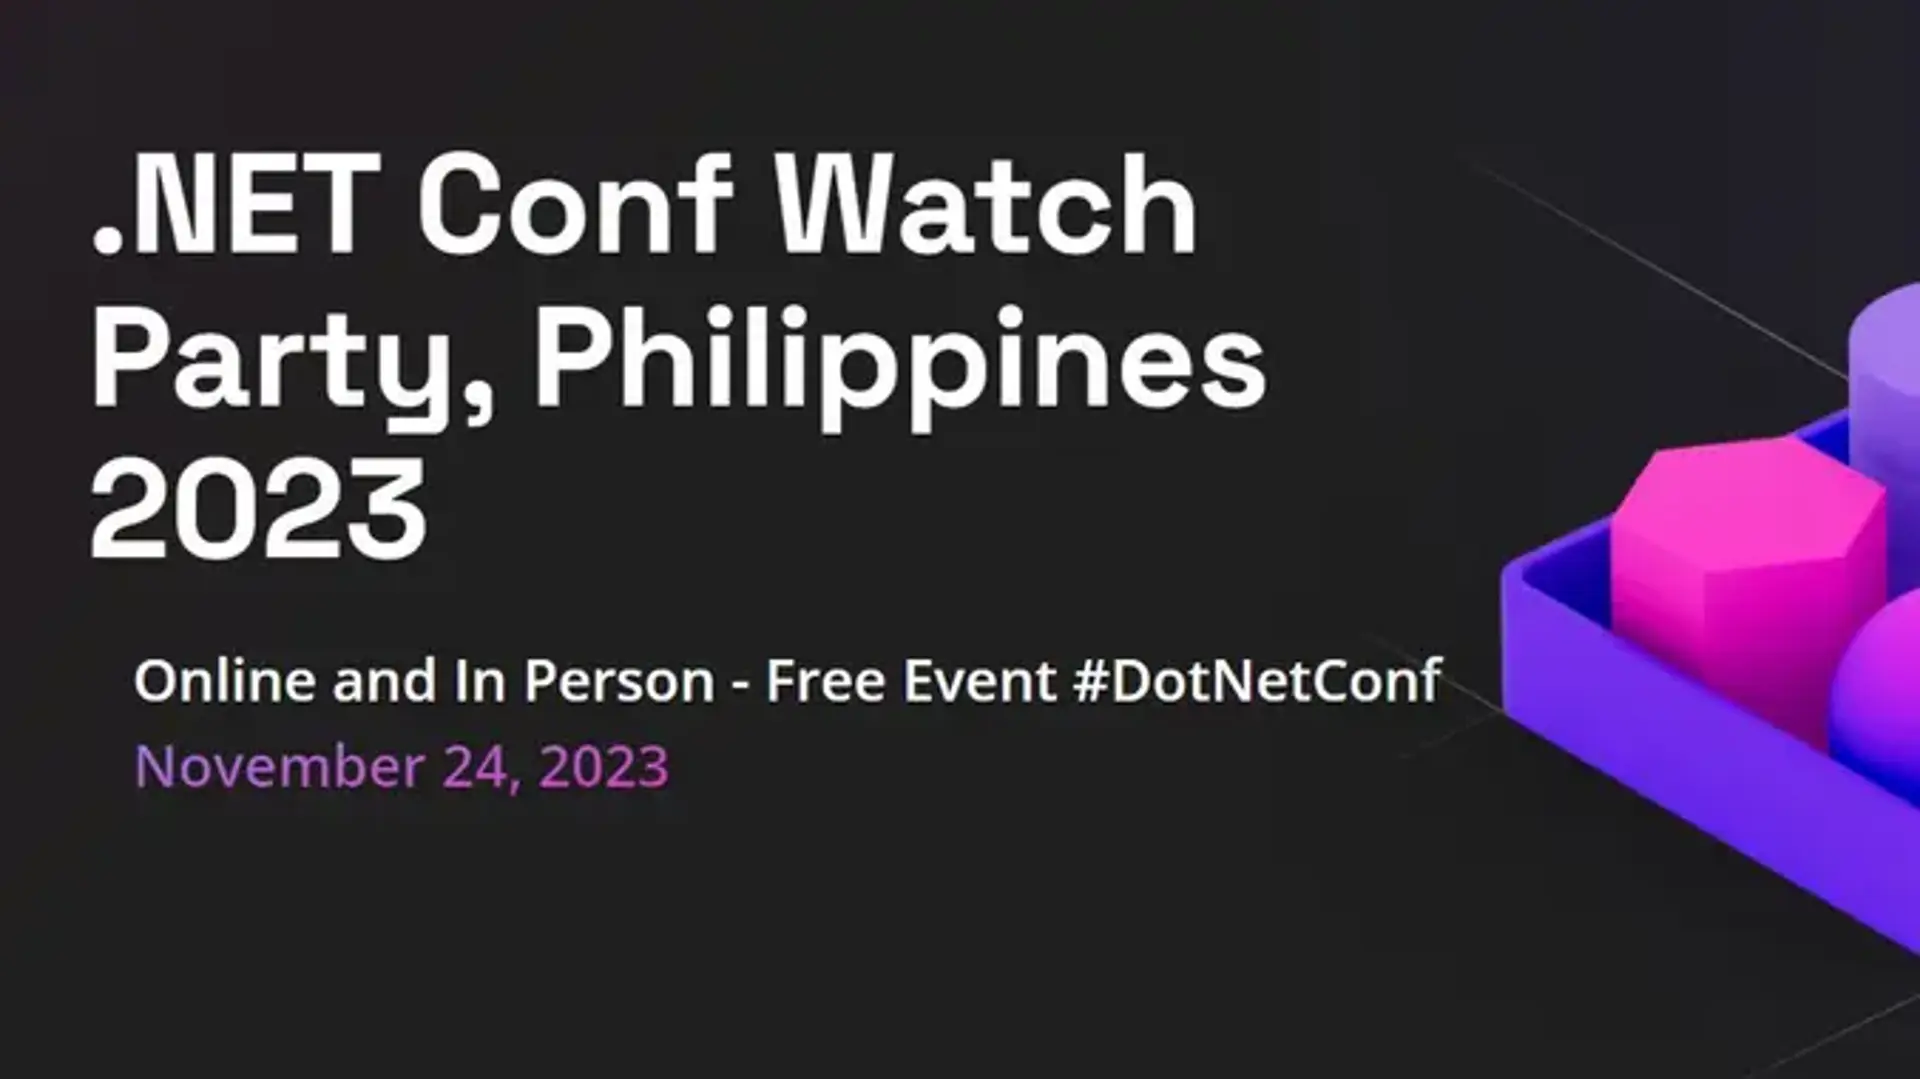 .NET Conf Watch Party, Philippines 2023